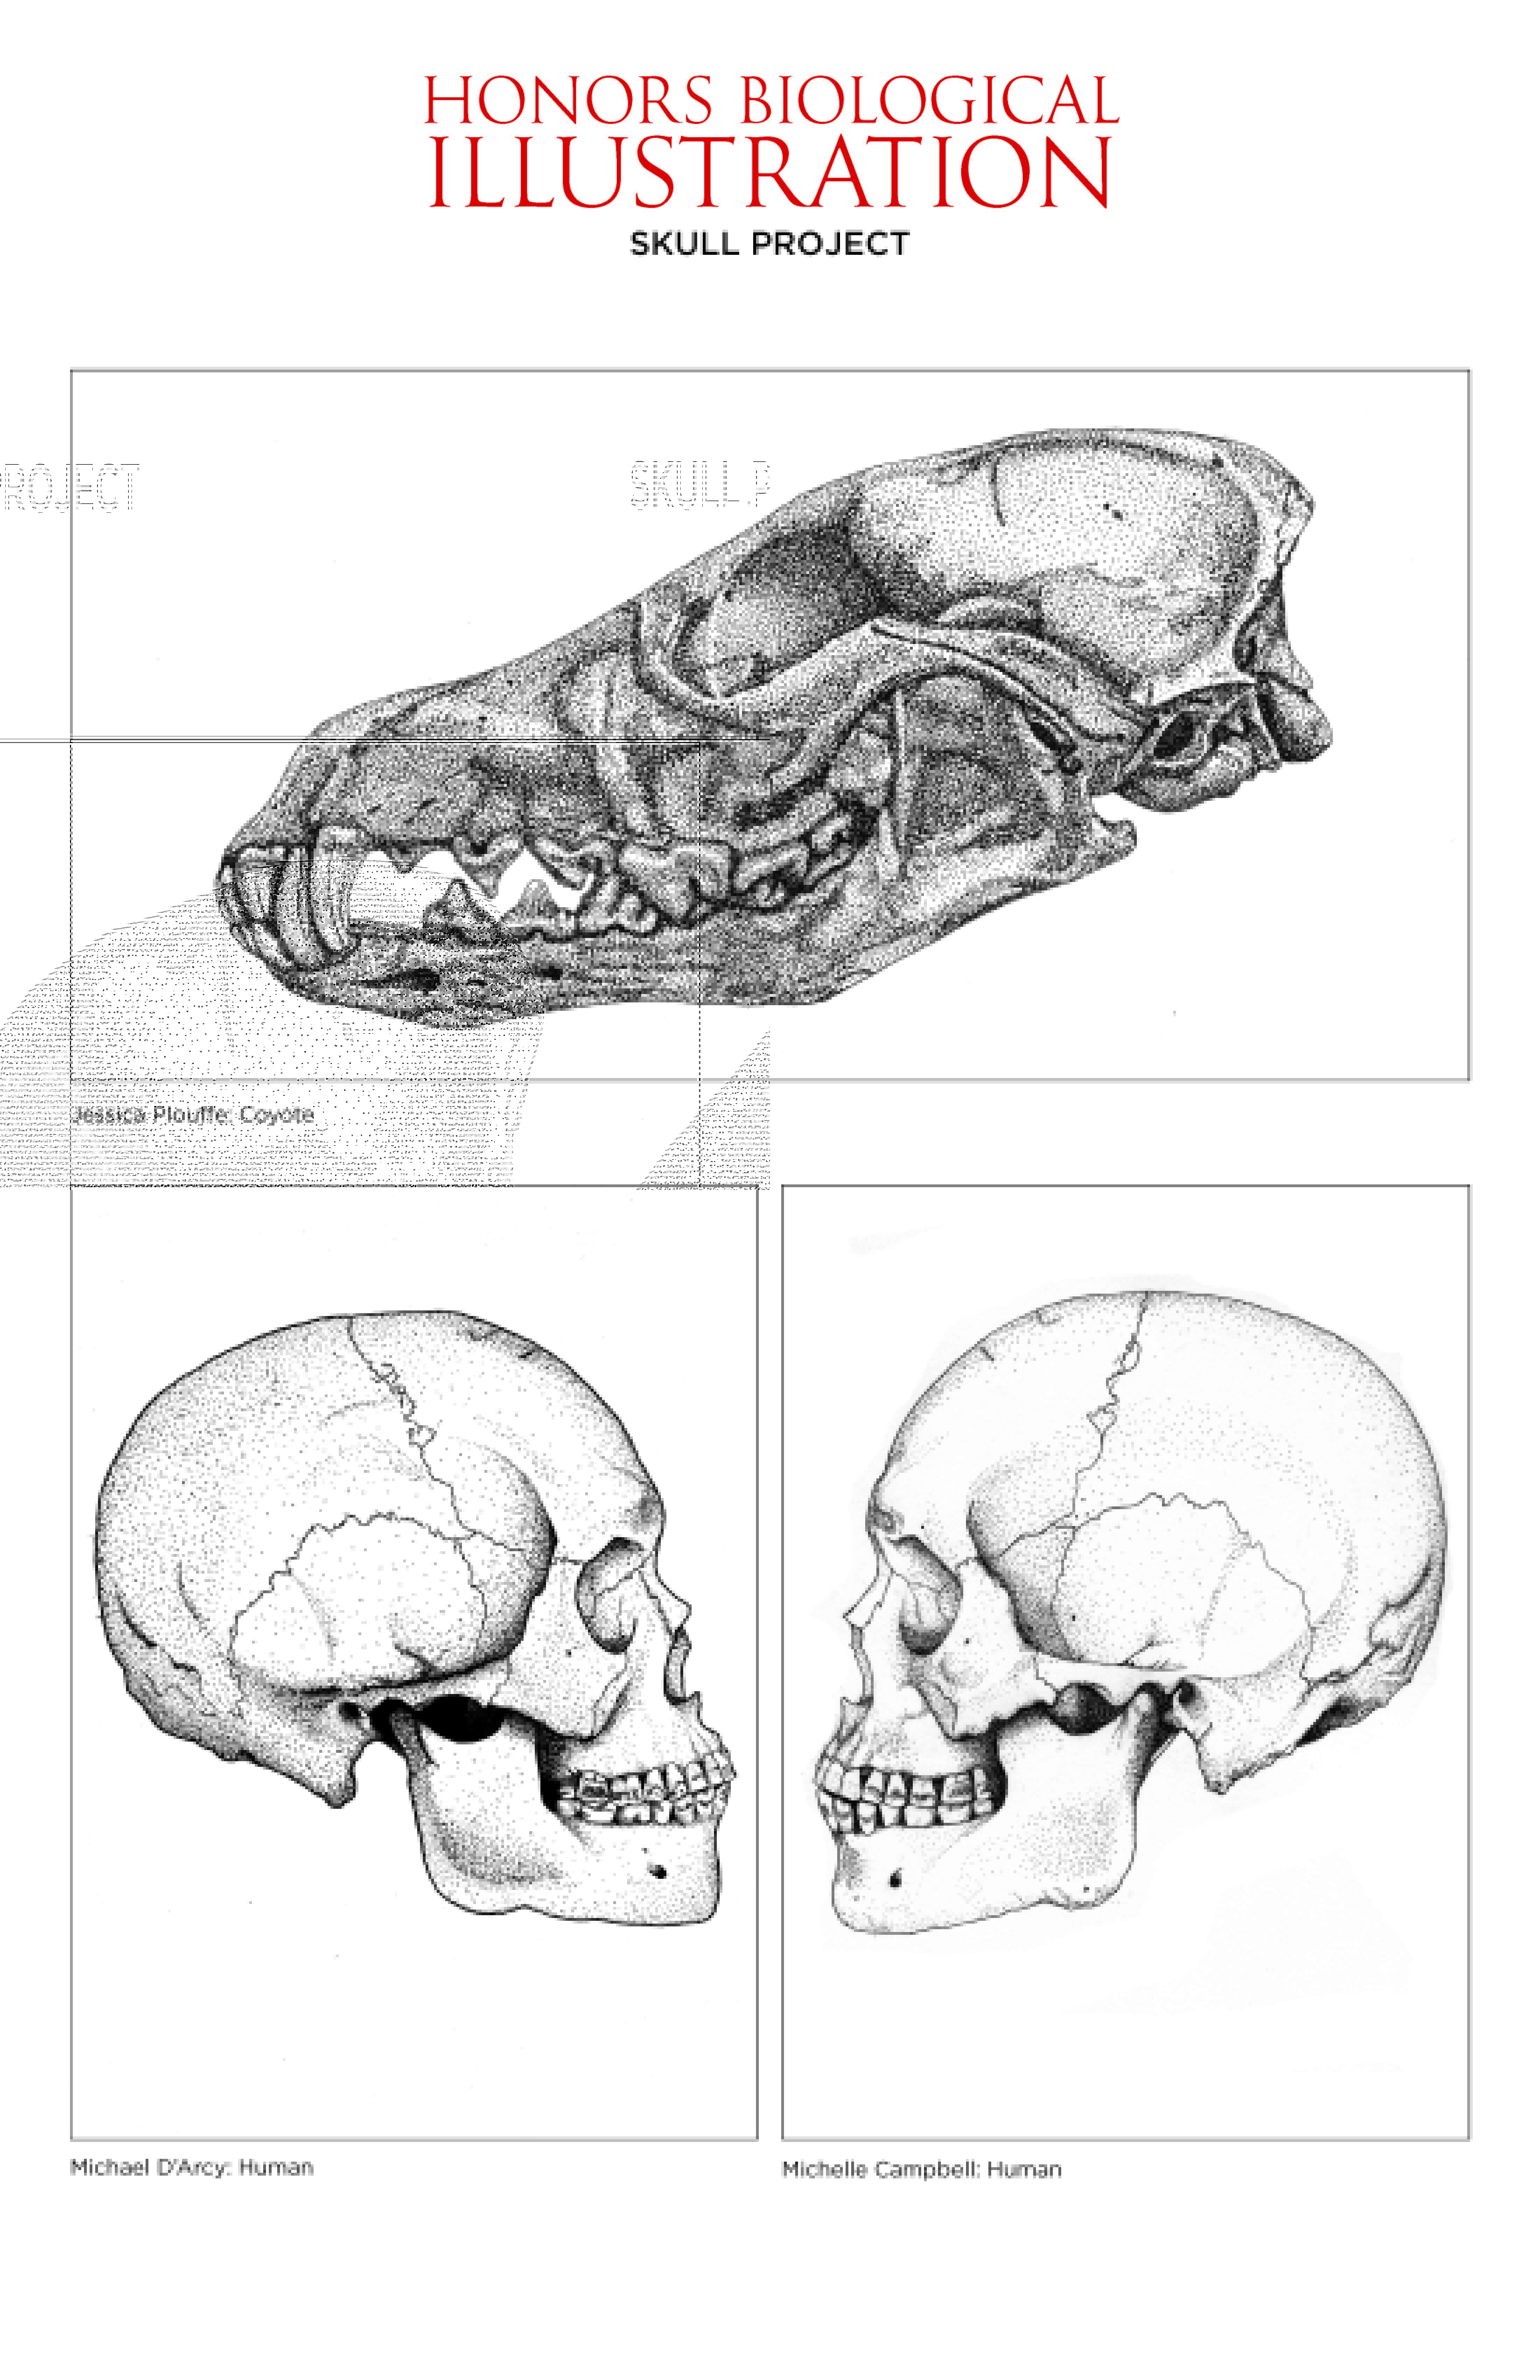 Drawings for Biological Illustration honors class. A coyote skull is on the top, facing left. Two human skulls, on the bottom left and right, face each other.